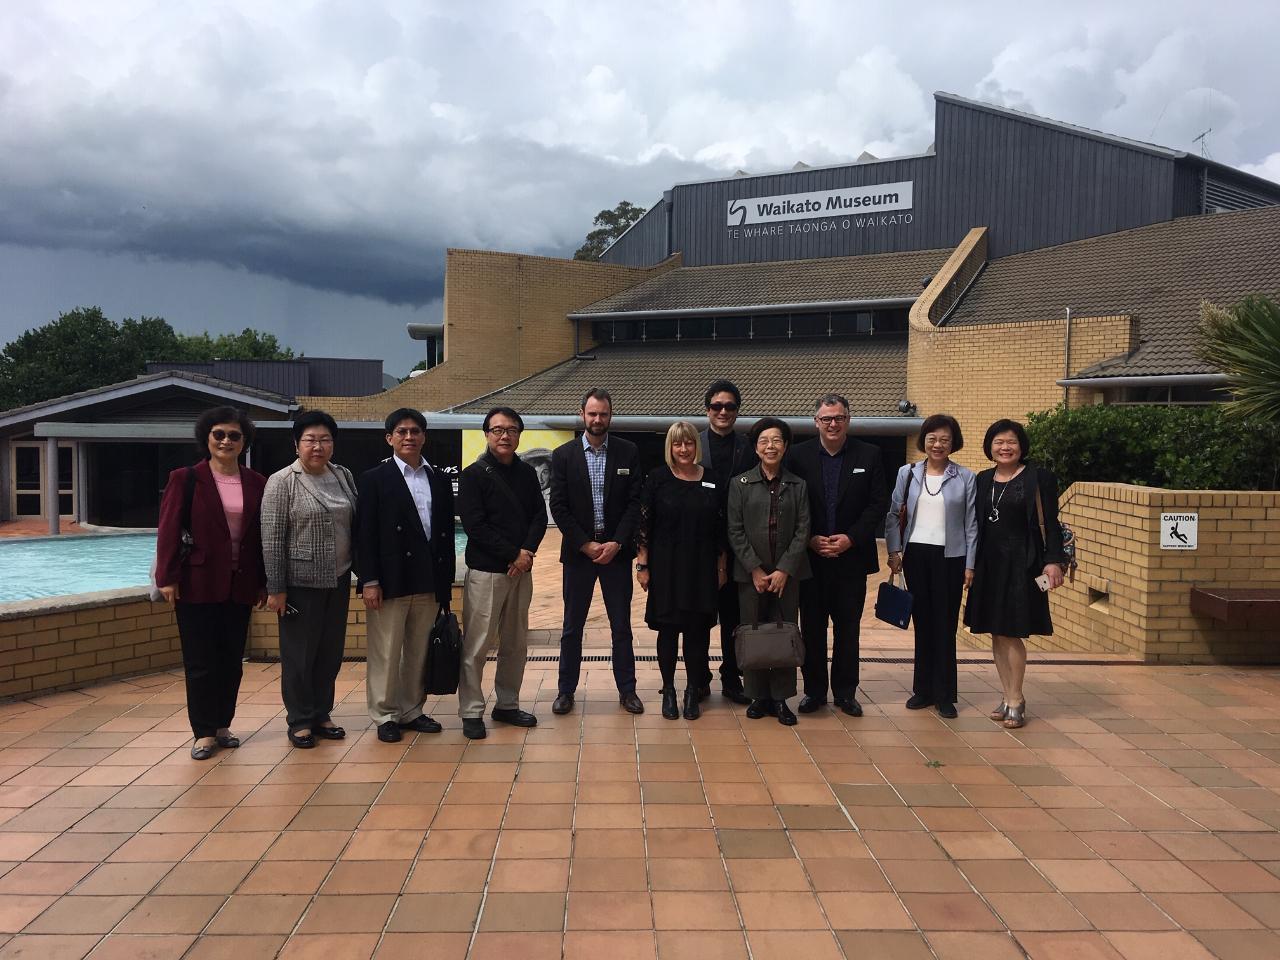 Dr.CHOU and delegation from the R.O.C. Control Yuan taking picture with Director of Waikato Museum, Ms.Cherie Meecham, Collections and Exhibitions Manager,Mr. Steve Chappell and Partnerships and Communications Manager, Mr.Dan Silverton.